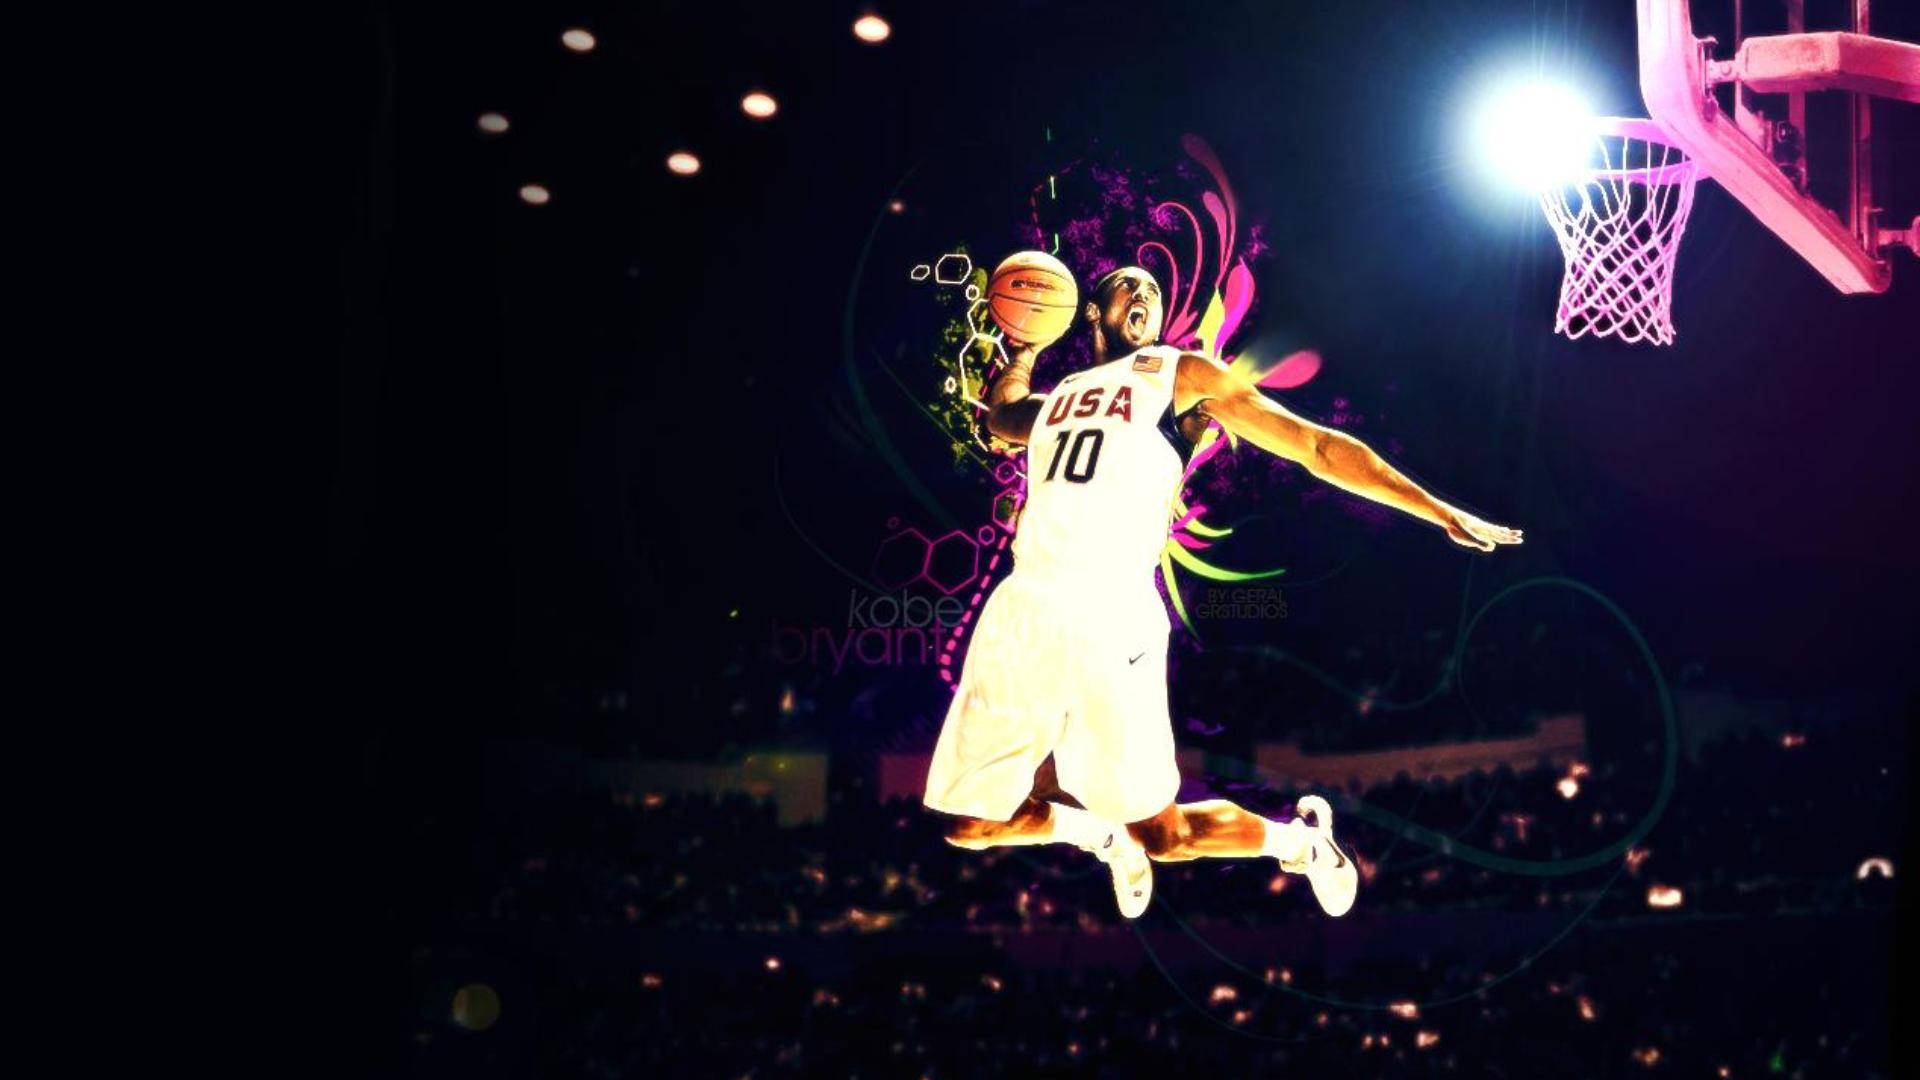 Hall of Fame NBA Legend Kobe Bryant always brought energy to the court Wallpaper